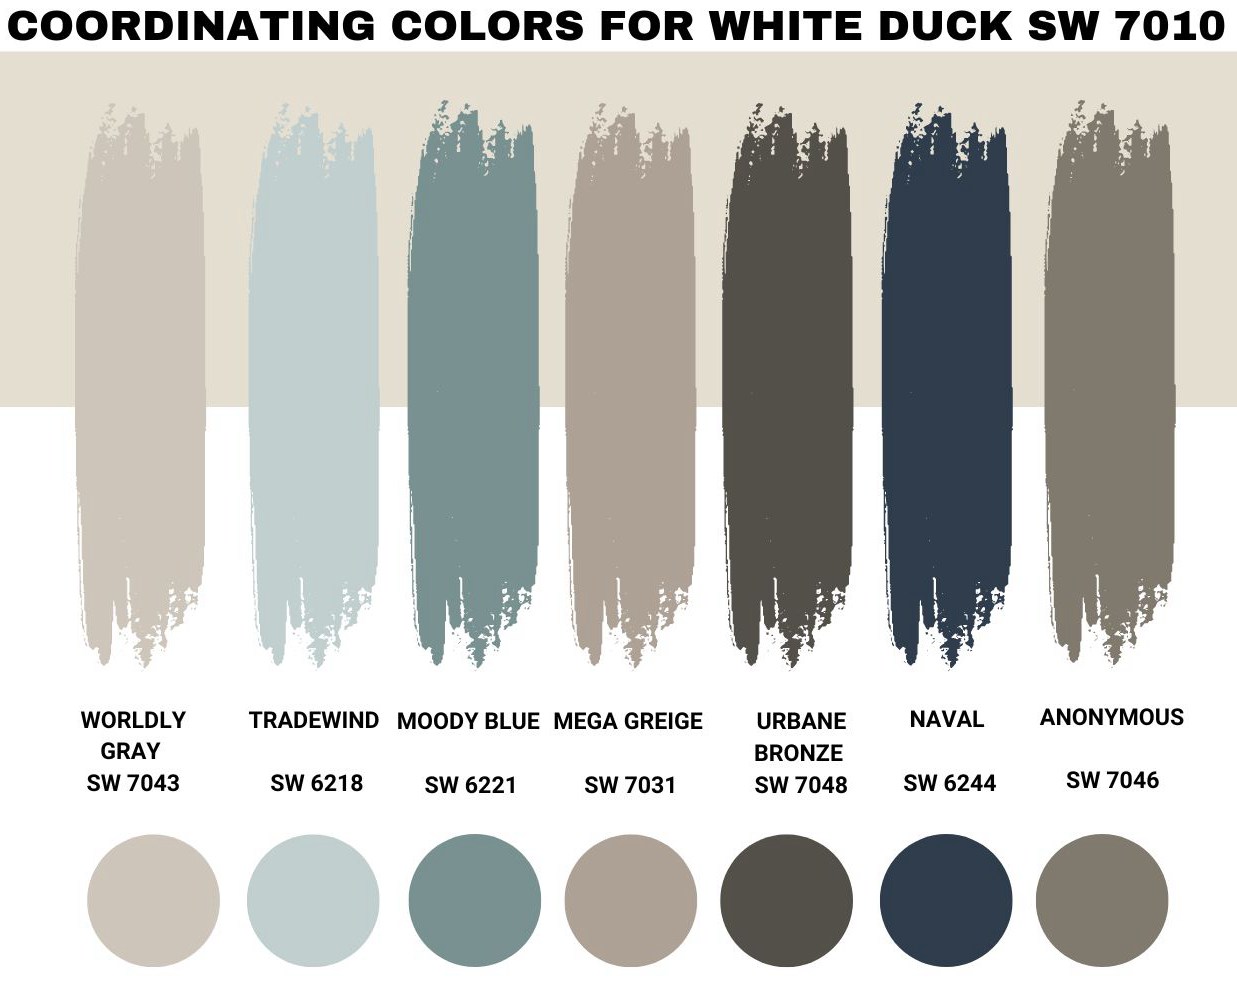 Coordinating Colors for White Duck SW 7010